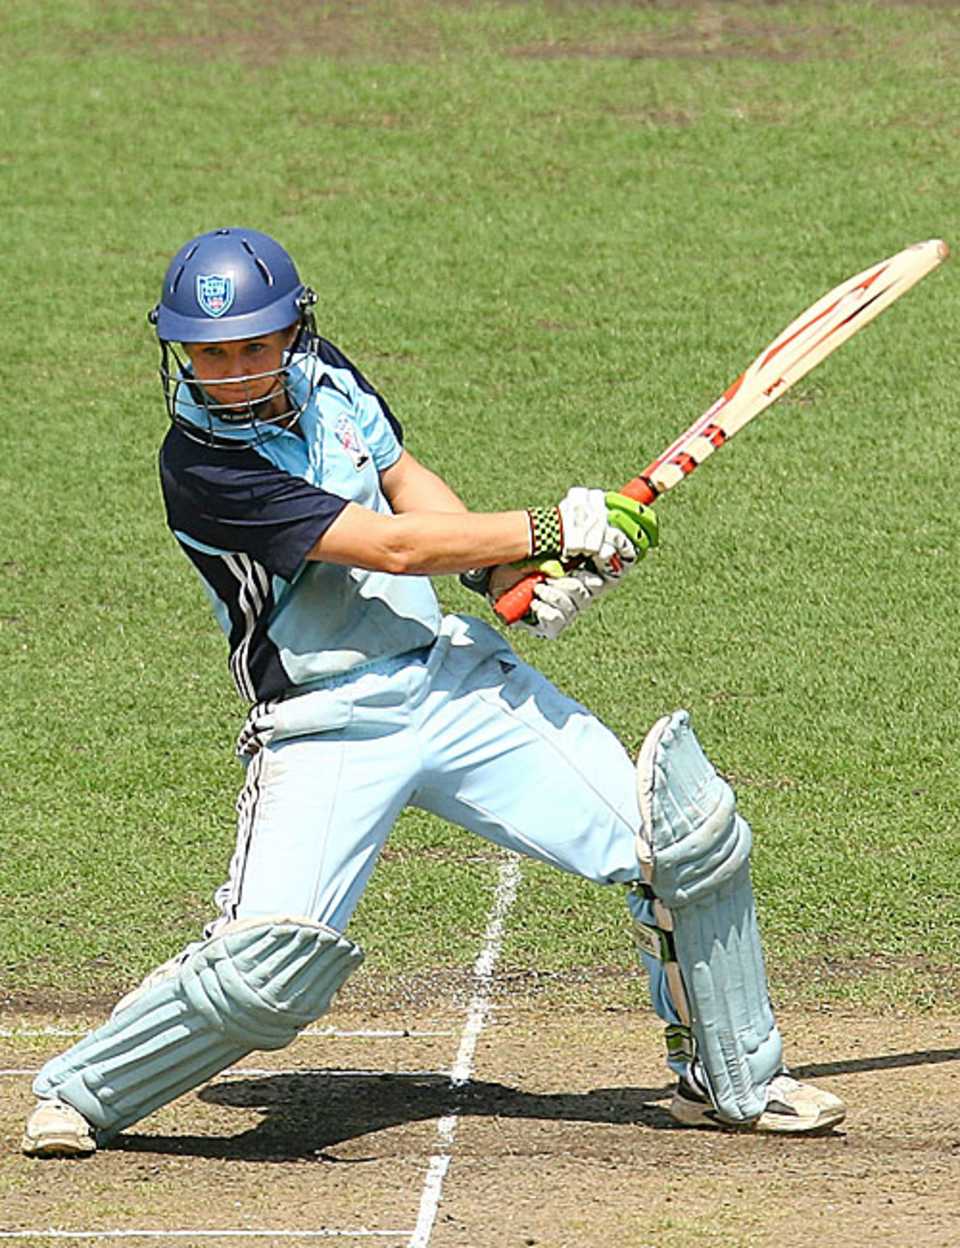 Leah Poulton top scored for New South Wales with 43